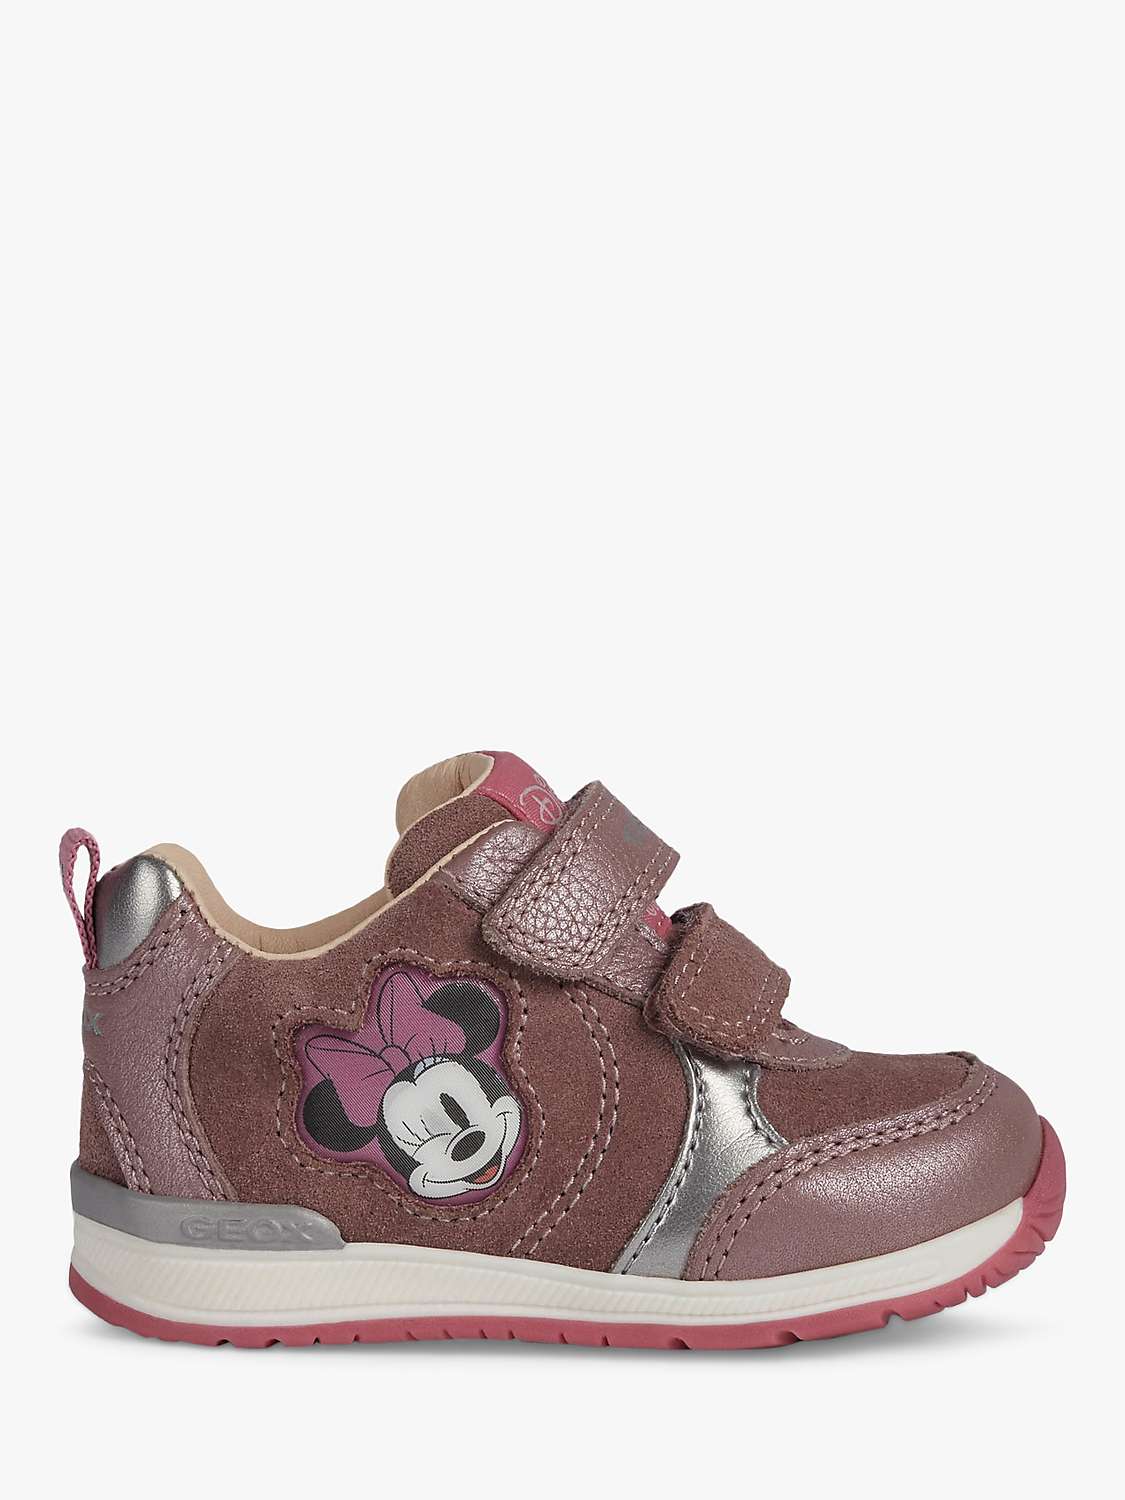 Buy Geox Kids' Rishon Minnie Mouse Pre-Walker Riptape Trainers Online at johnlewis.com